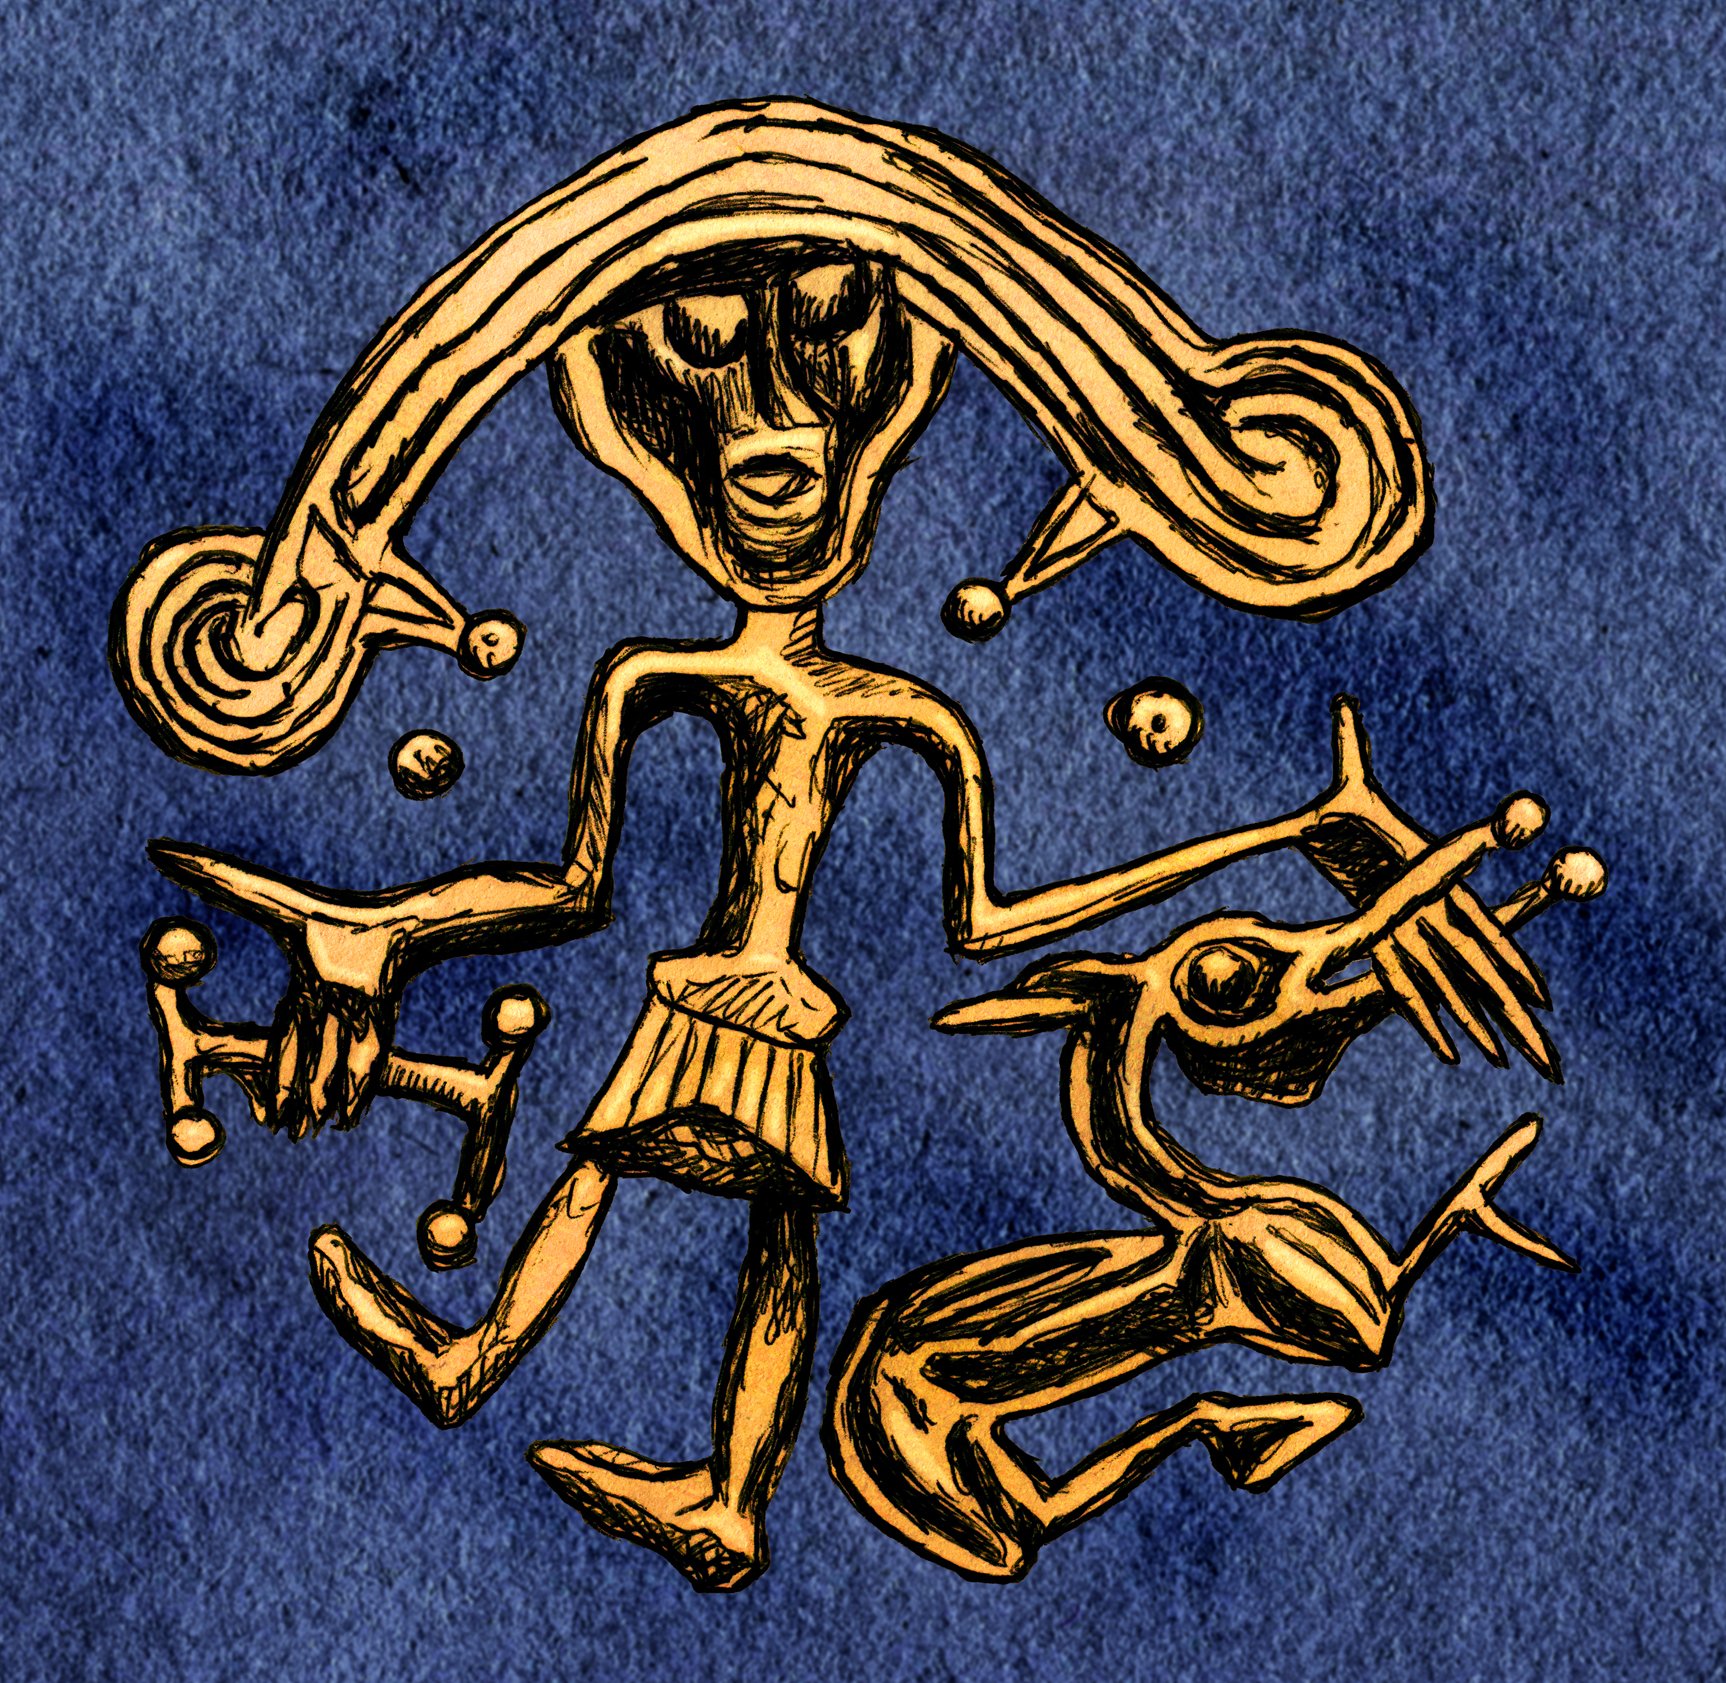 An illustration of a figure with long hair and a wolf on a blue background. The figure is Tyr and the wolf is Fenrir, characters from Norse mythology. The figure is drawn in a gold color. The wolf is also drawn in a gold color and has the figure's hand in its mouth. The background is a textured blue color.